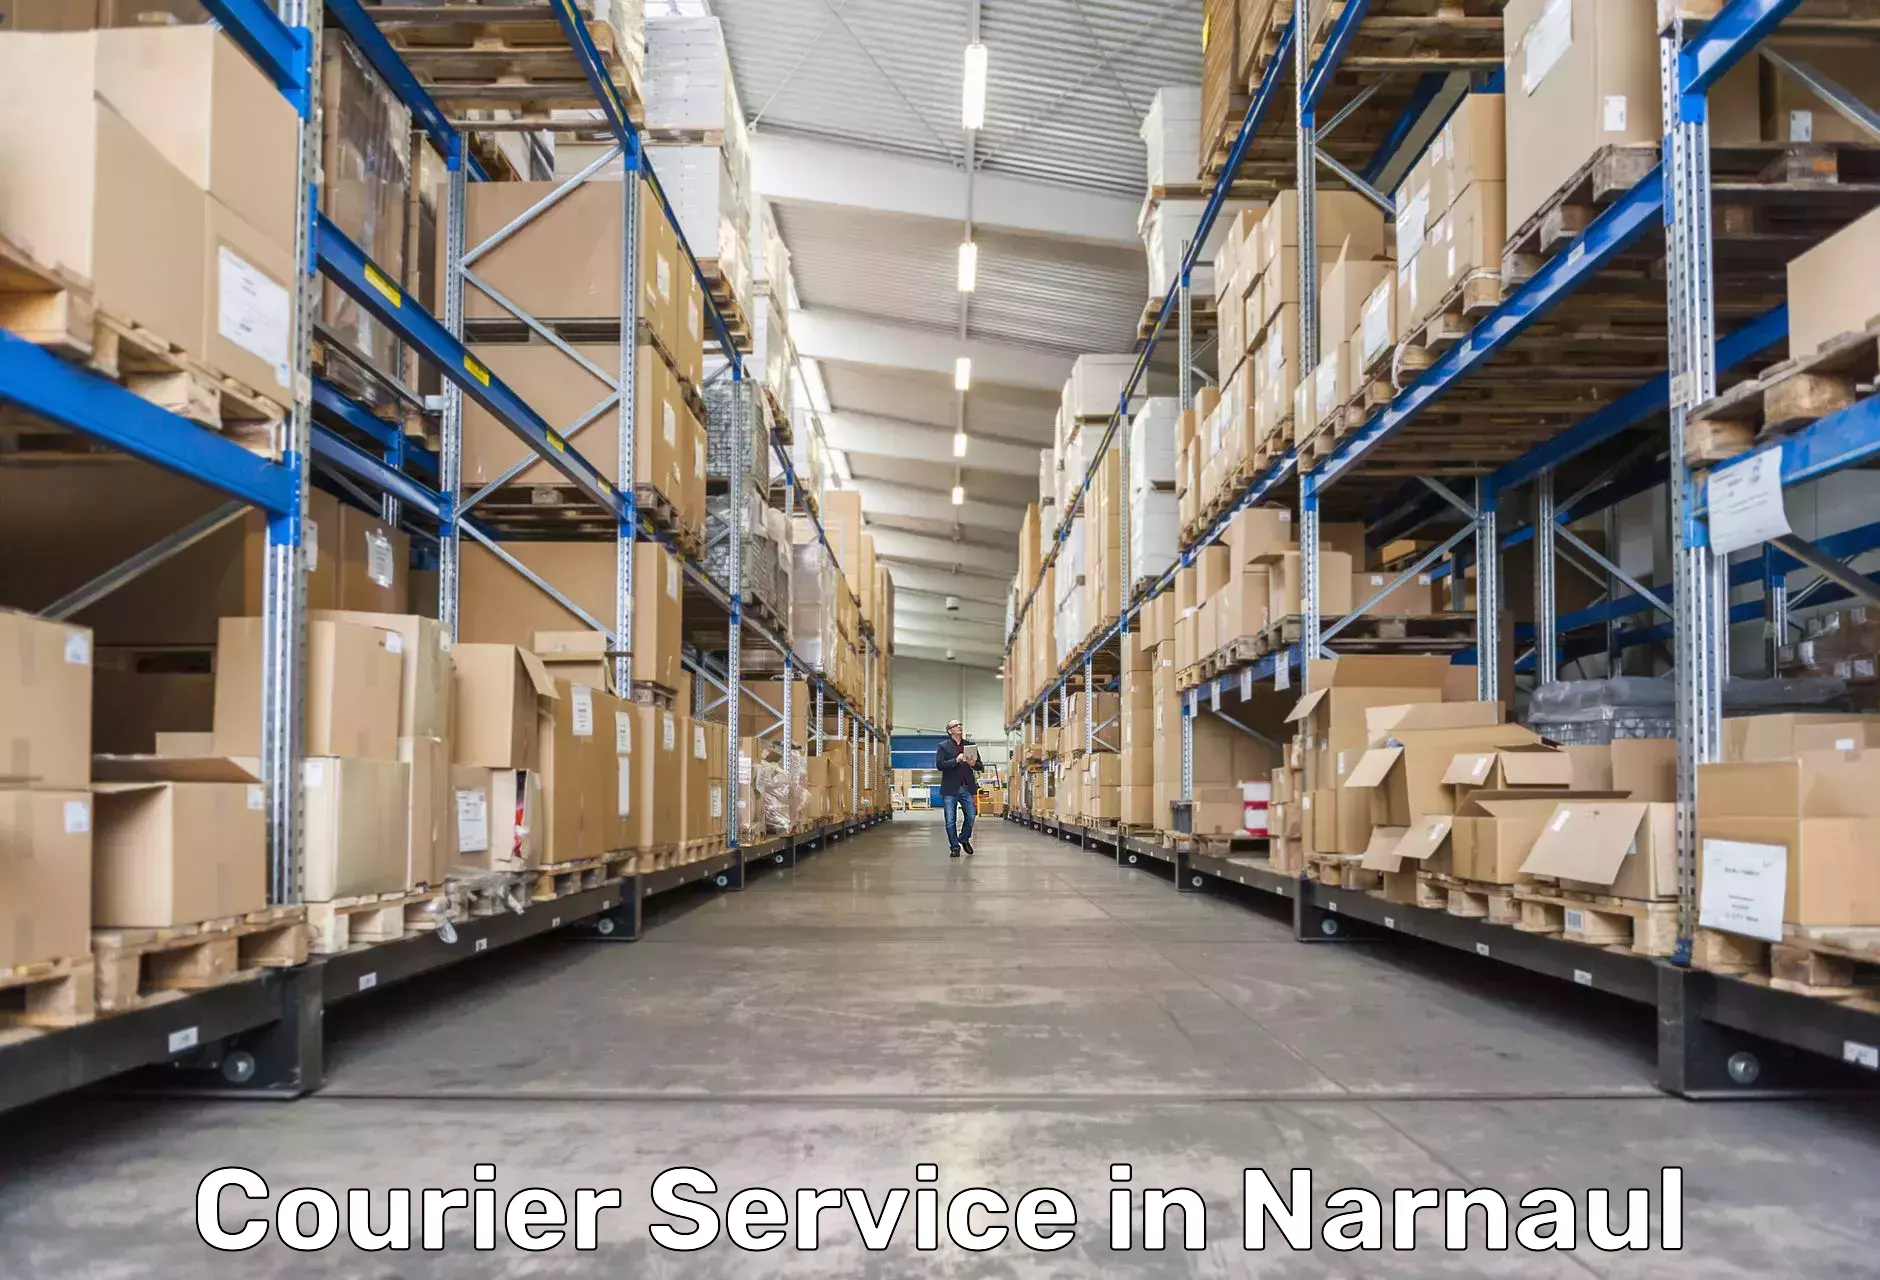 Express package delivery in Narnaul